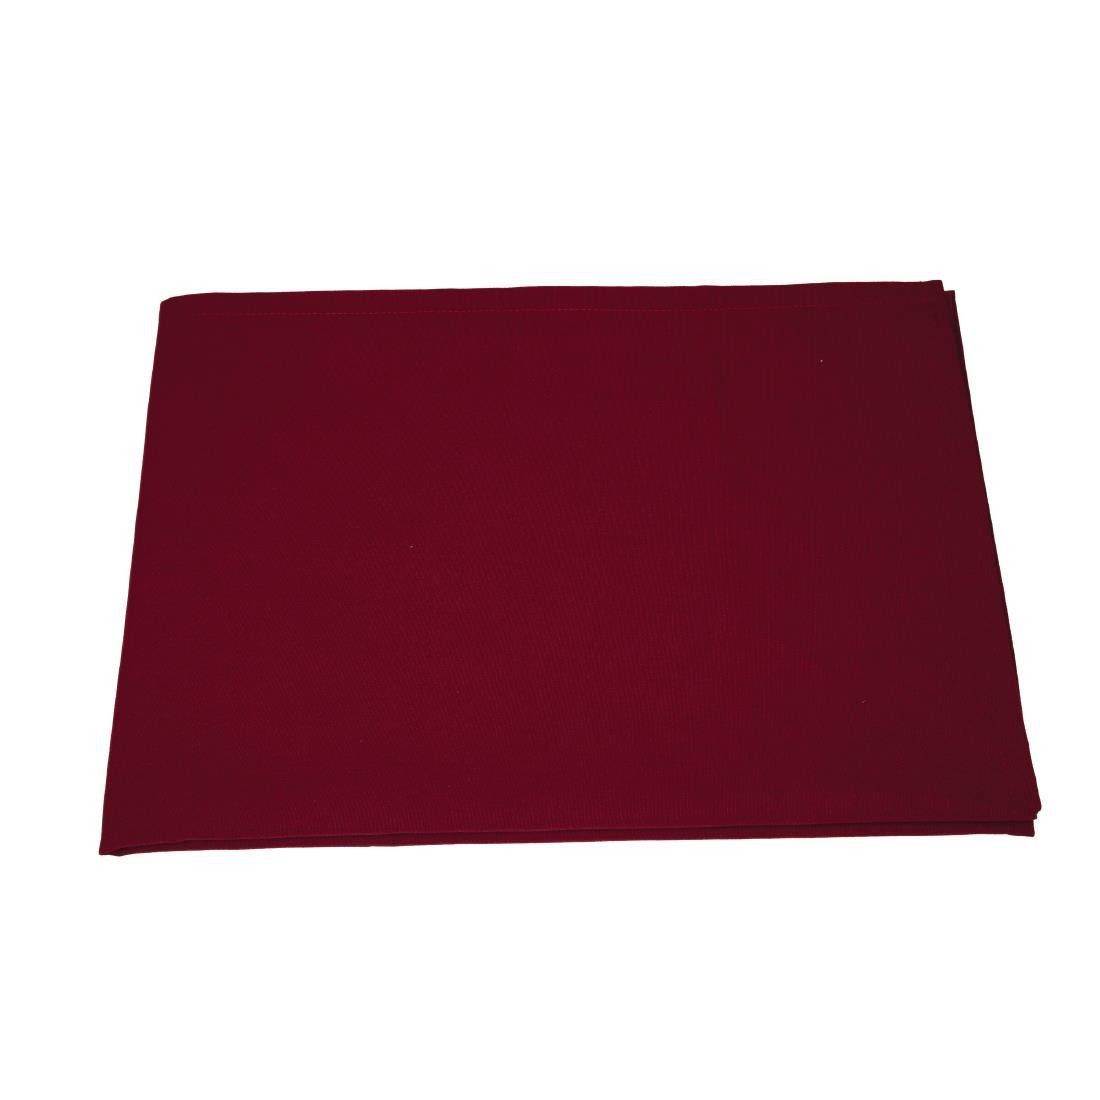 Occasions Tablecloth Burgundy 2290 x 2290mm - HB570  - 4